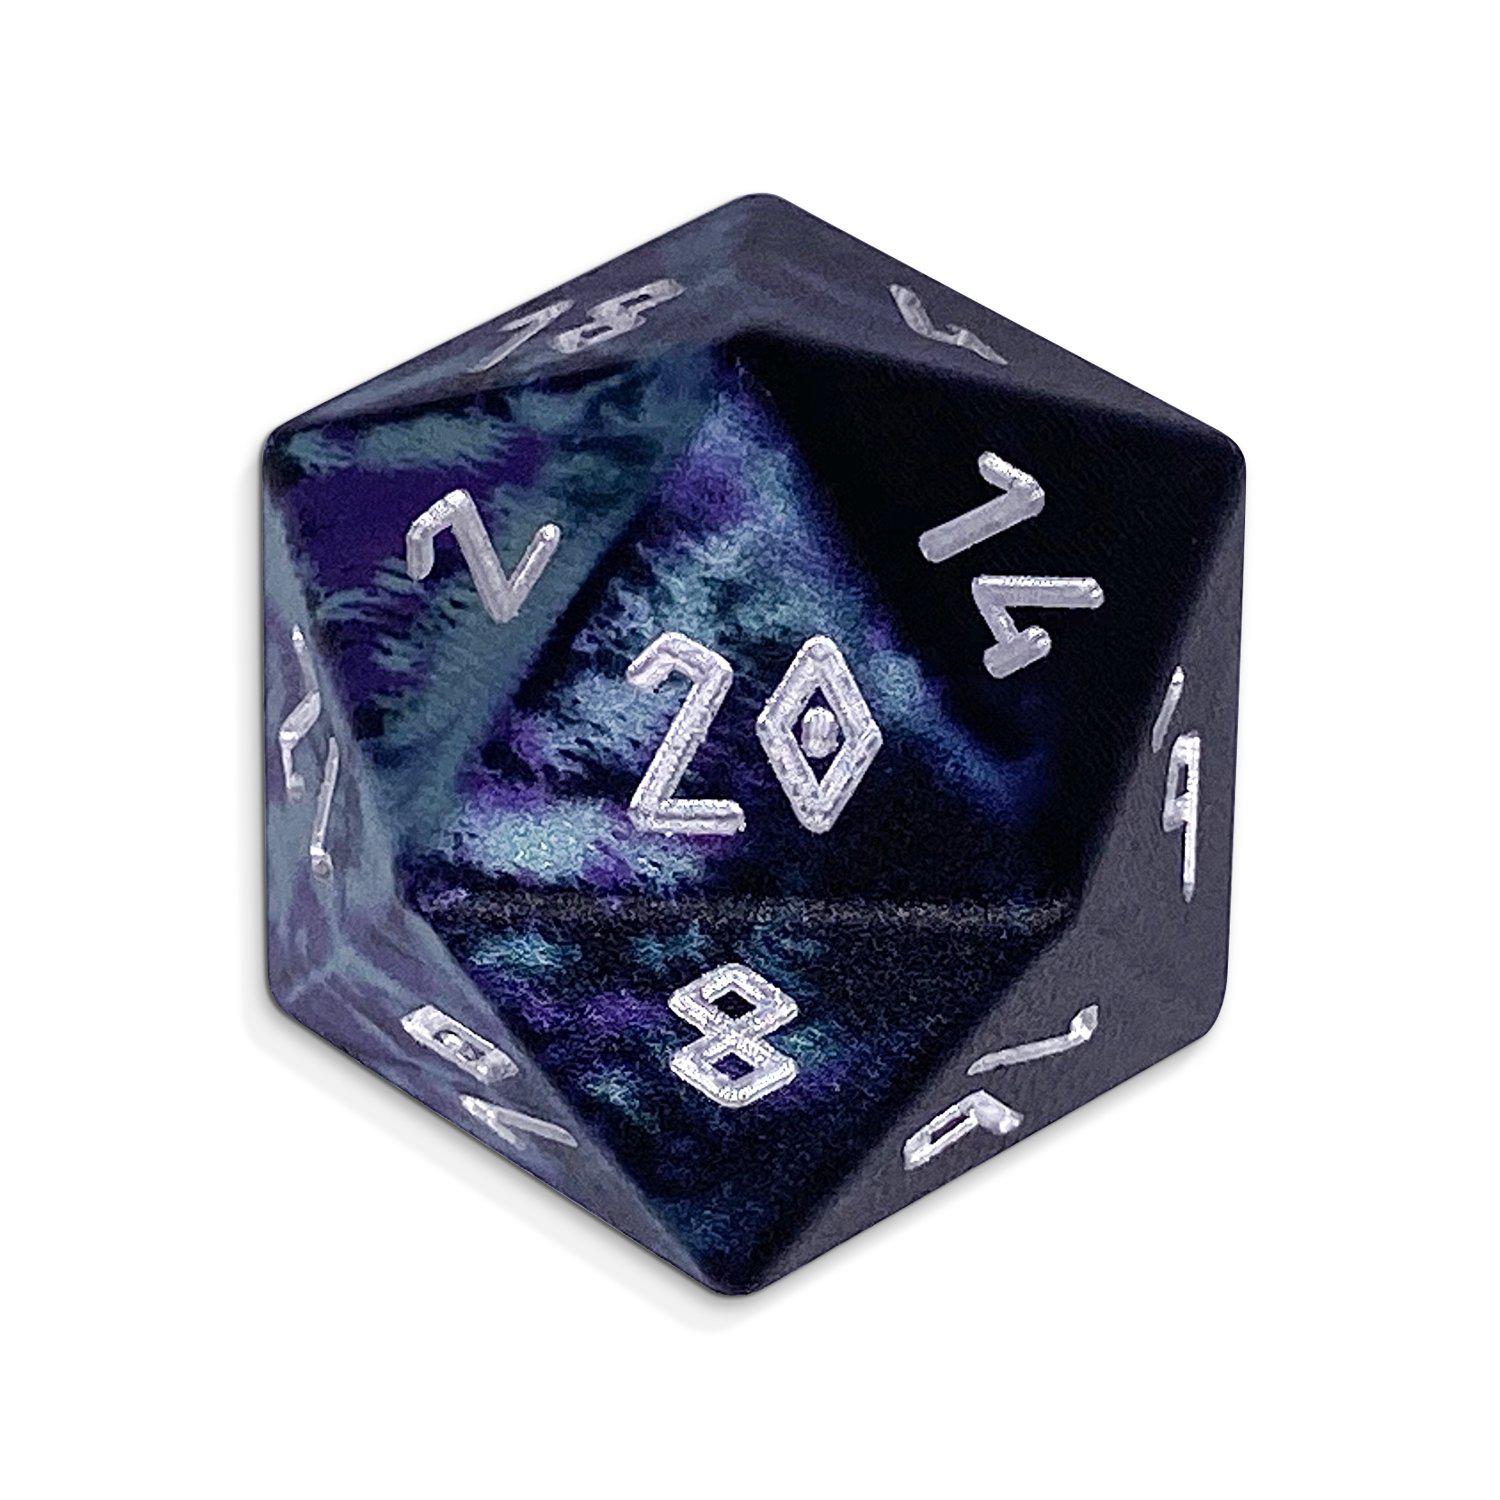 Single Wondrous Dice® D20 in Witches Cauldron by Norse Foundry® 6063 Aircraft Grade Aluminum